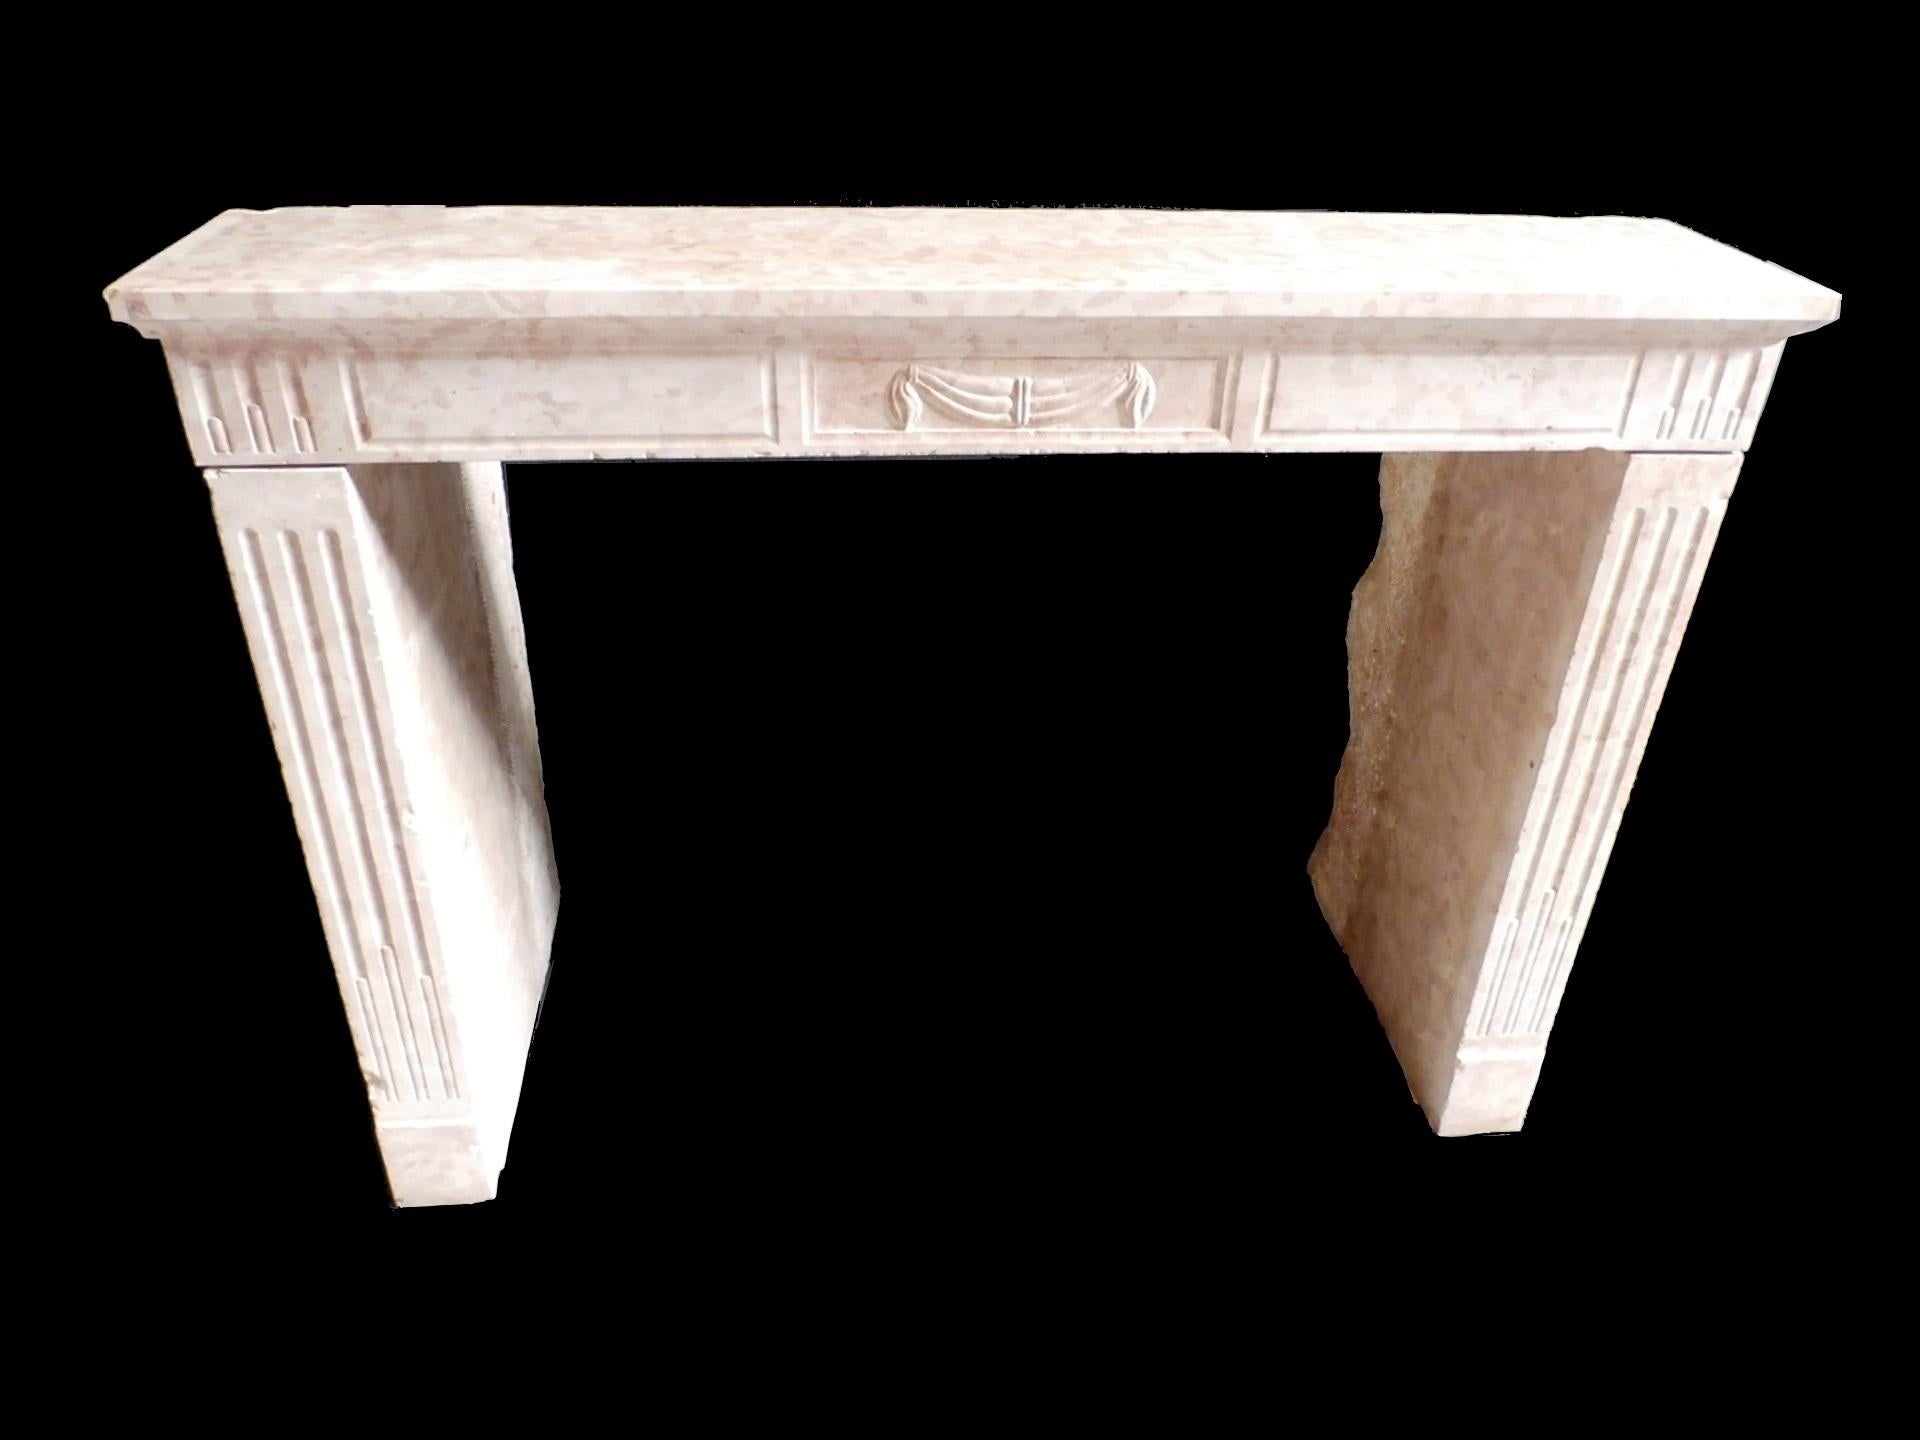 An elegant, understated piece of simple beauty. This beige/burgundy toned fireplace mantel, with more geometrical carving, will add the finishing touch to your modern or classic living room.

If you are looking for the perfect piece to complement